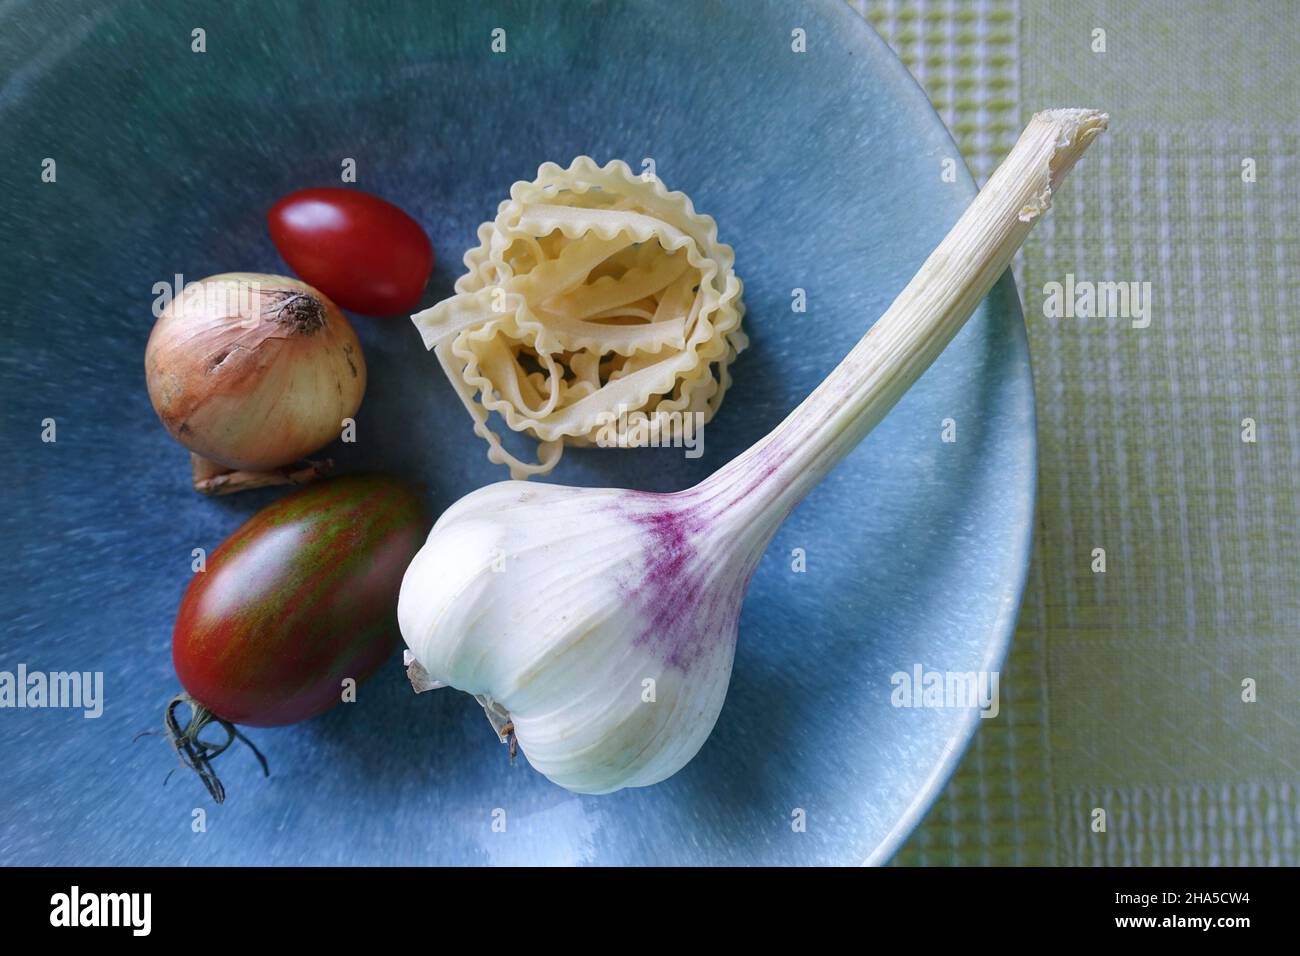 blue bowl with vegetables. garlic,tomatoes,noodles and onions,ingredients for a pasta dish. Stock Photo